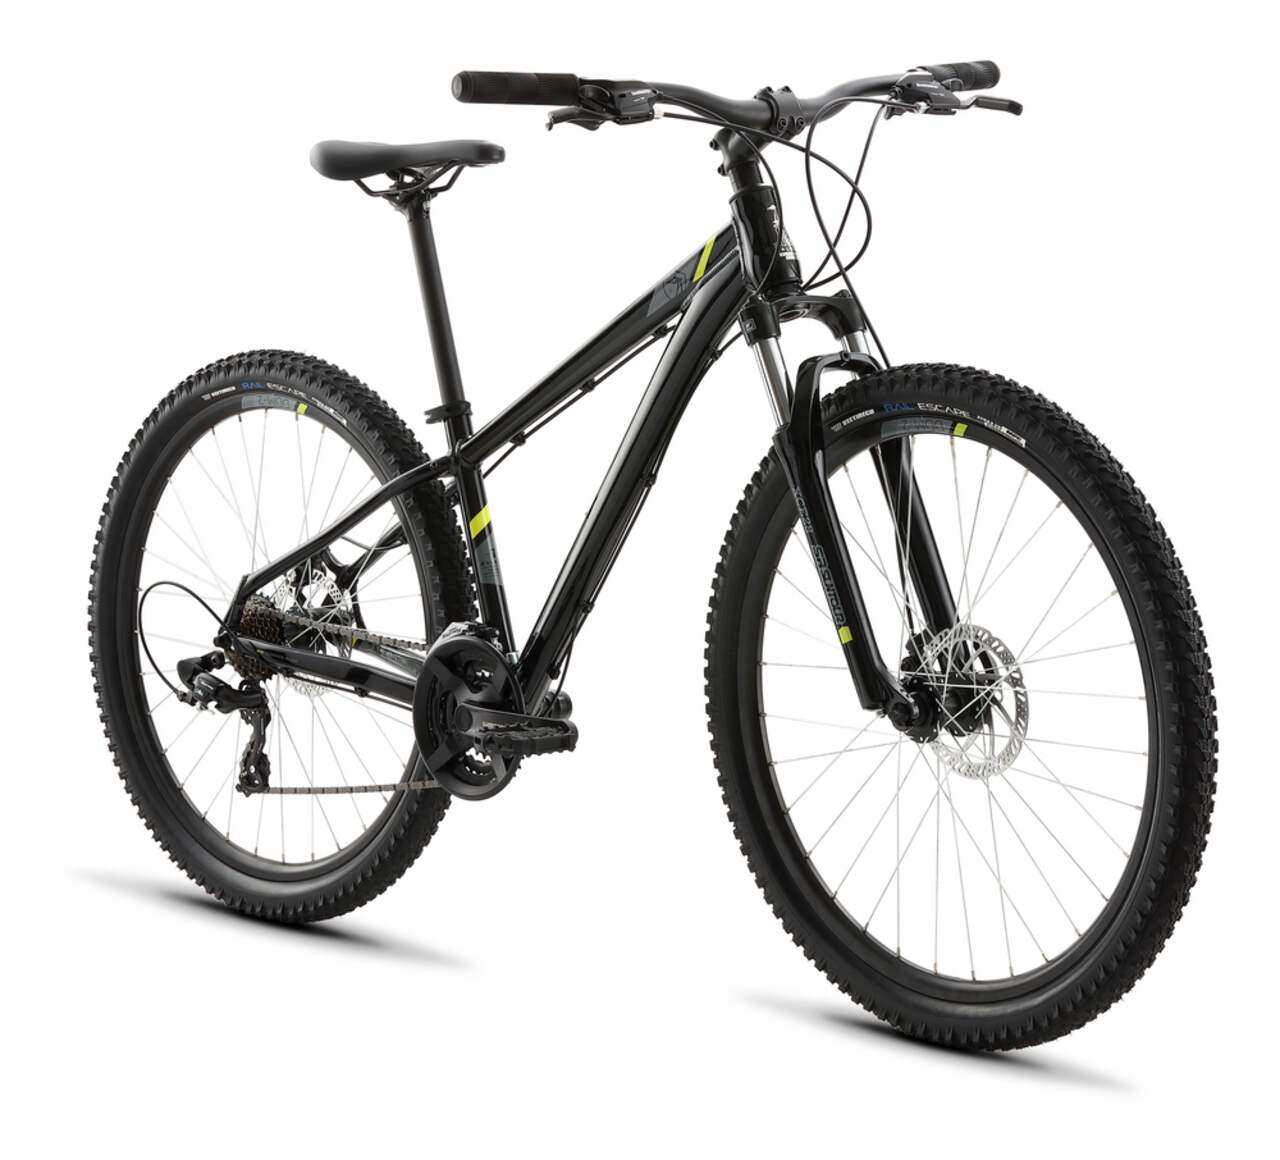 https://media-www.canadiantire.ca/product/playing/cycling/bicycles/0711190/raleigh-27-5-w-talus-hardtail-mountain-bike-shiny-grey-1b64f7a9-51cf-4bbd-9de4-b549c5c55f94.png?imdensity=1&imwidth=640&impolicy=mZoom